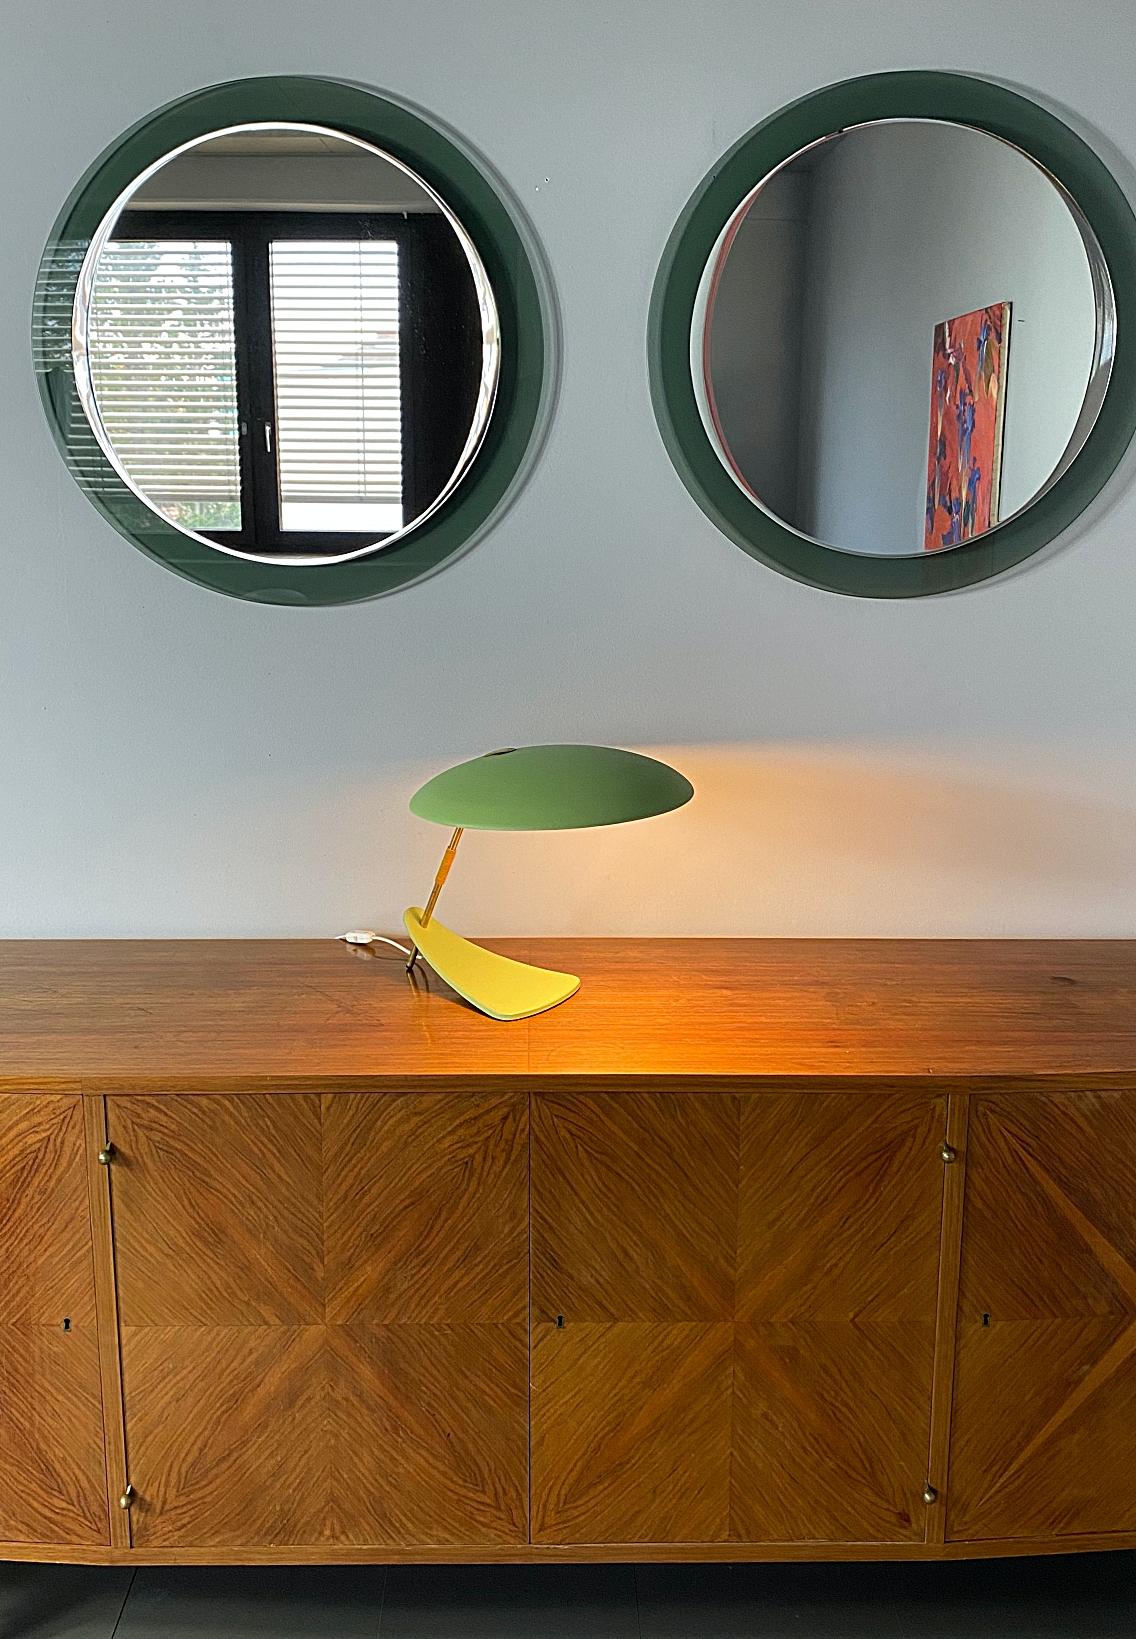 Iconic midcentury desk lamp in pistachio wrinkle paint with brass details. Minimalistic design from the 1950s, big round shade with cast iron beak-shaped base. The shade provides a smooth large-area light. Nice patina without bumps or dents. Newly